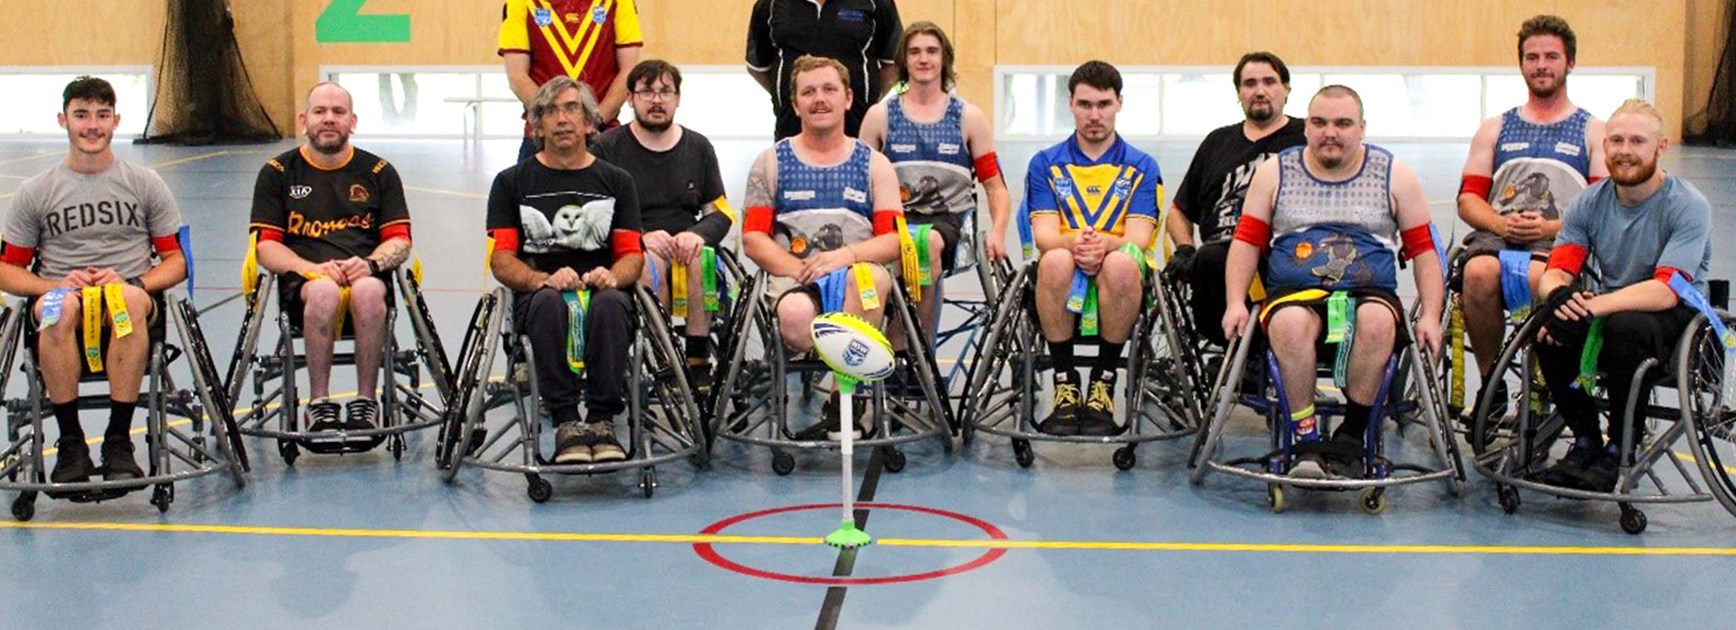 Griffith to host Wheelchair Rugby League event